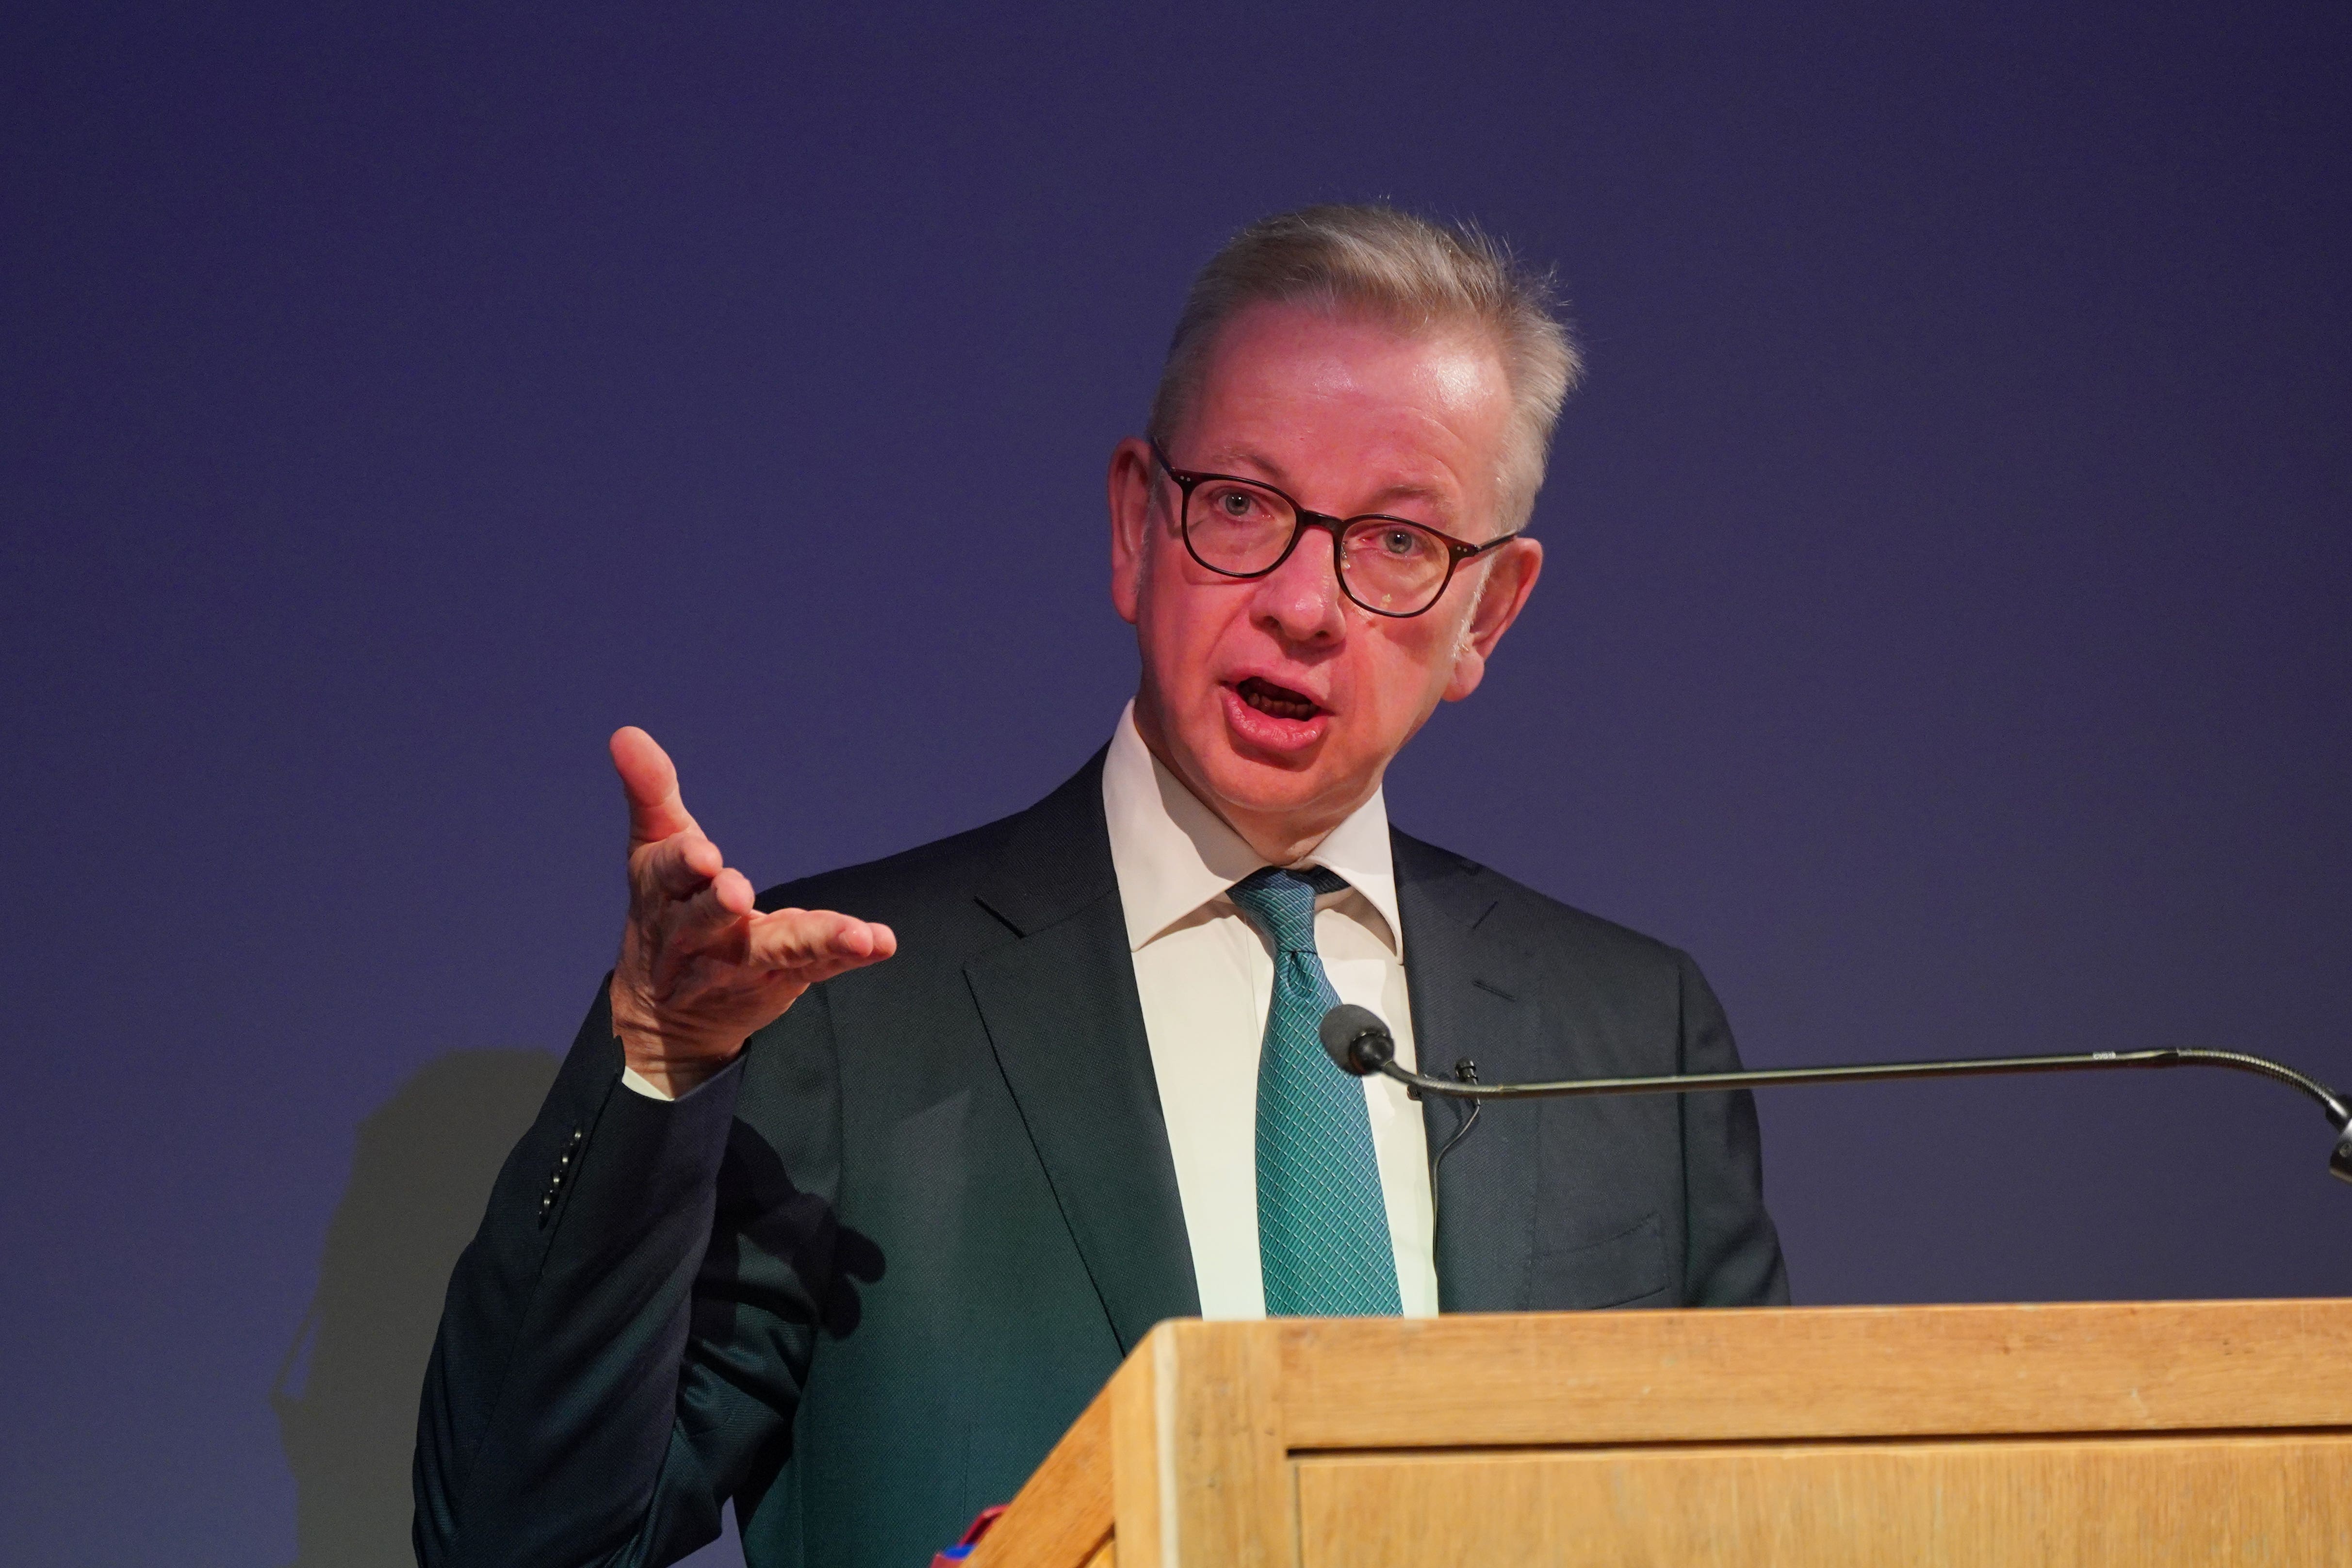 Michael Gove paints an attractive picture about redeveloping British cities, but he stops extremely short of a plan of how to get there